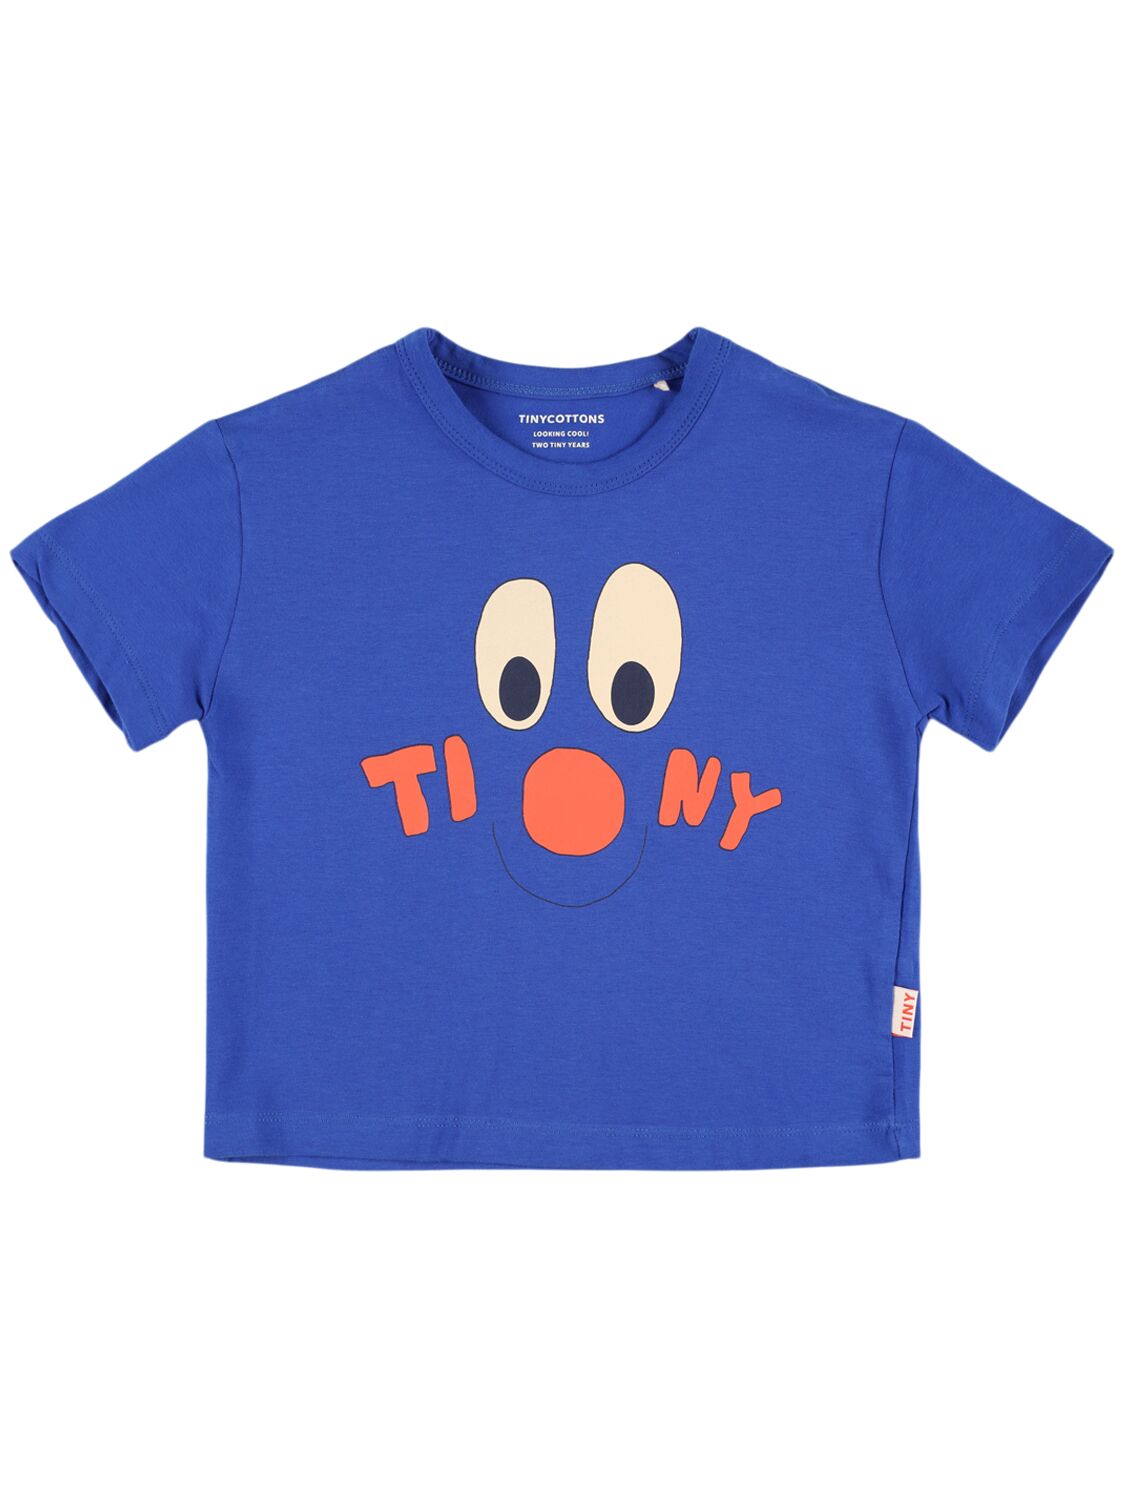 Tiny Cottons Kids' Printed Organic Cotton T-shirt In Blue